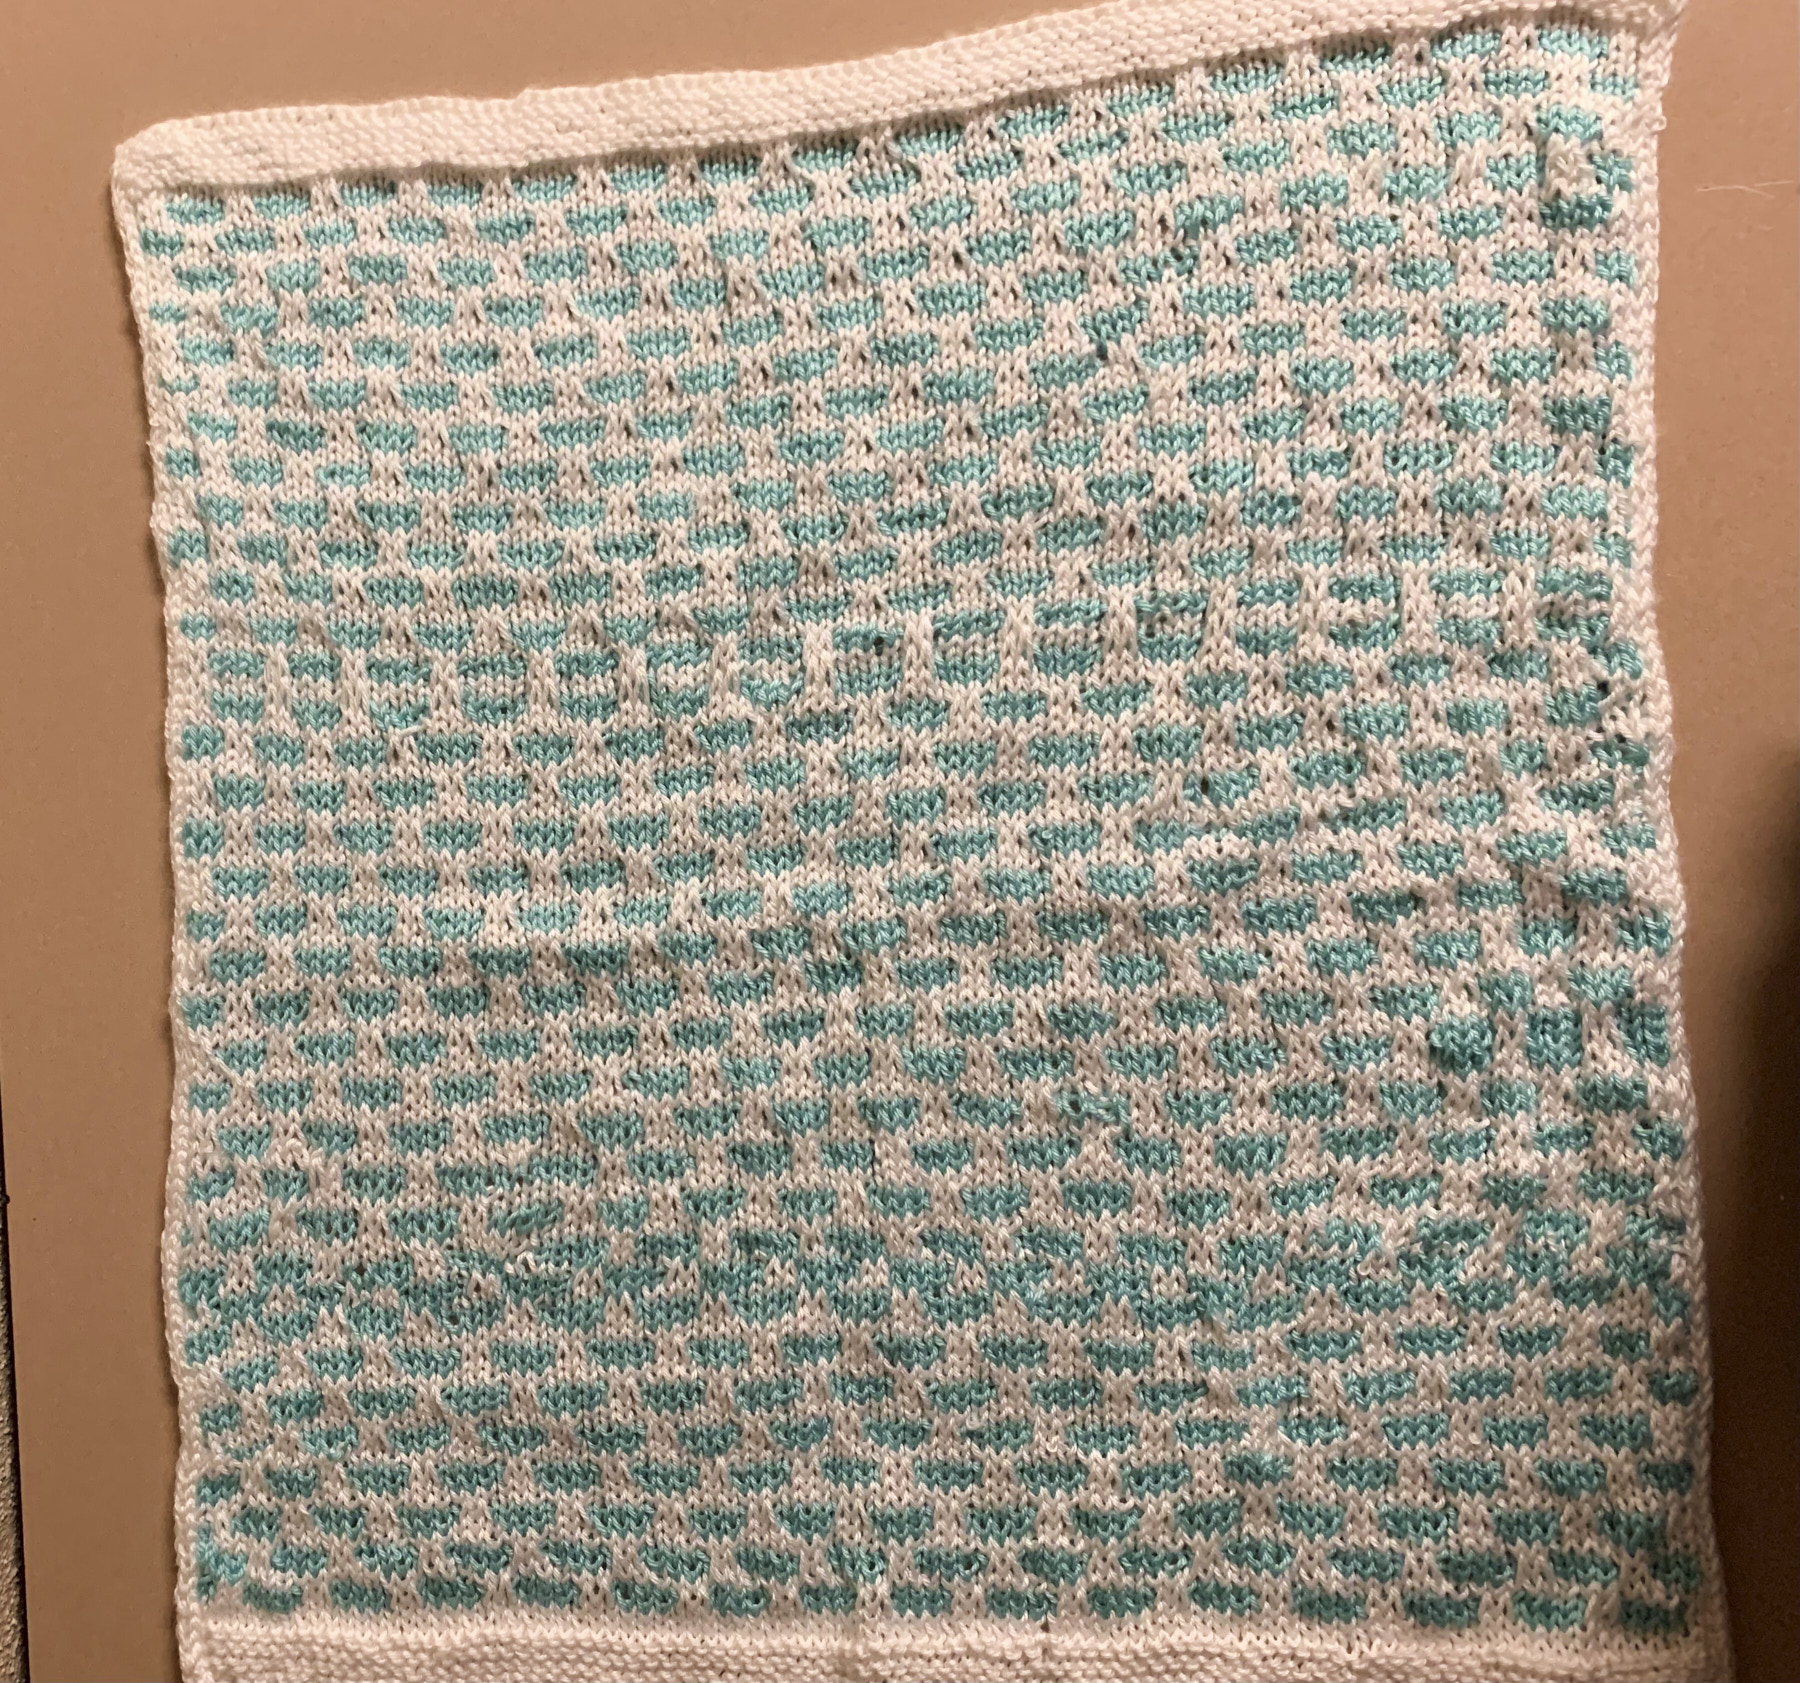 Baby blanket done by Kay Southam.